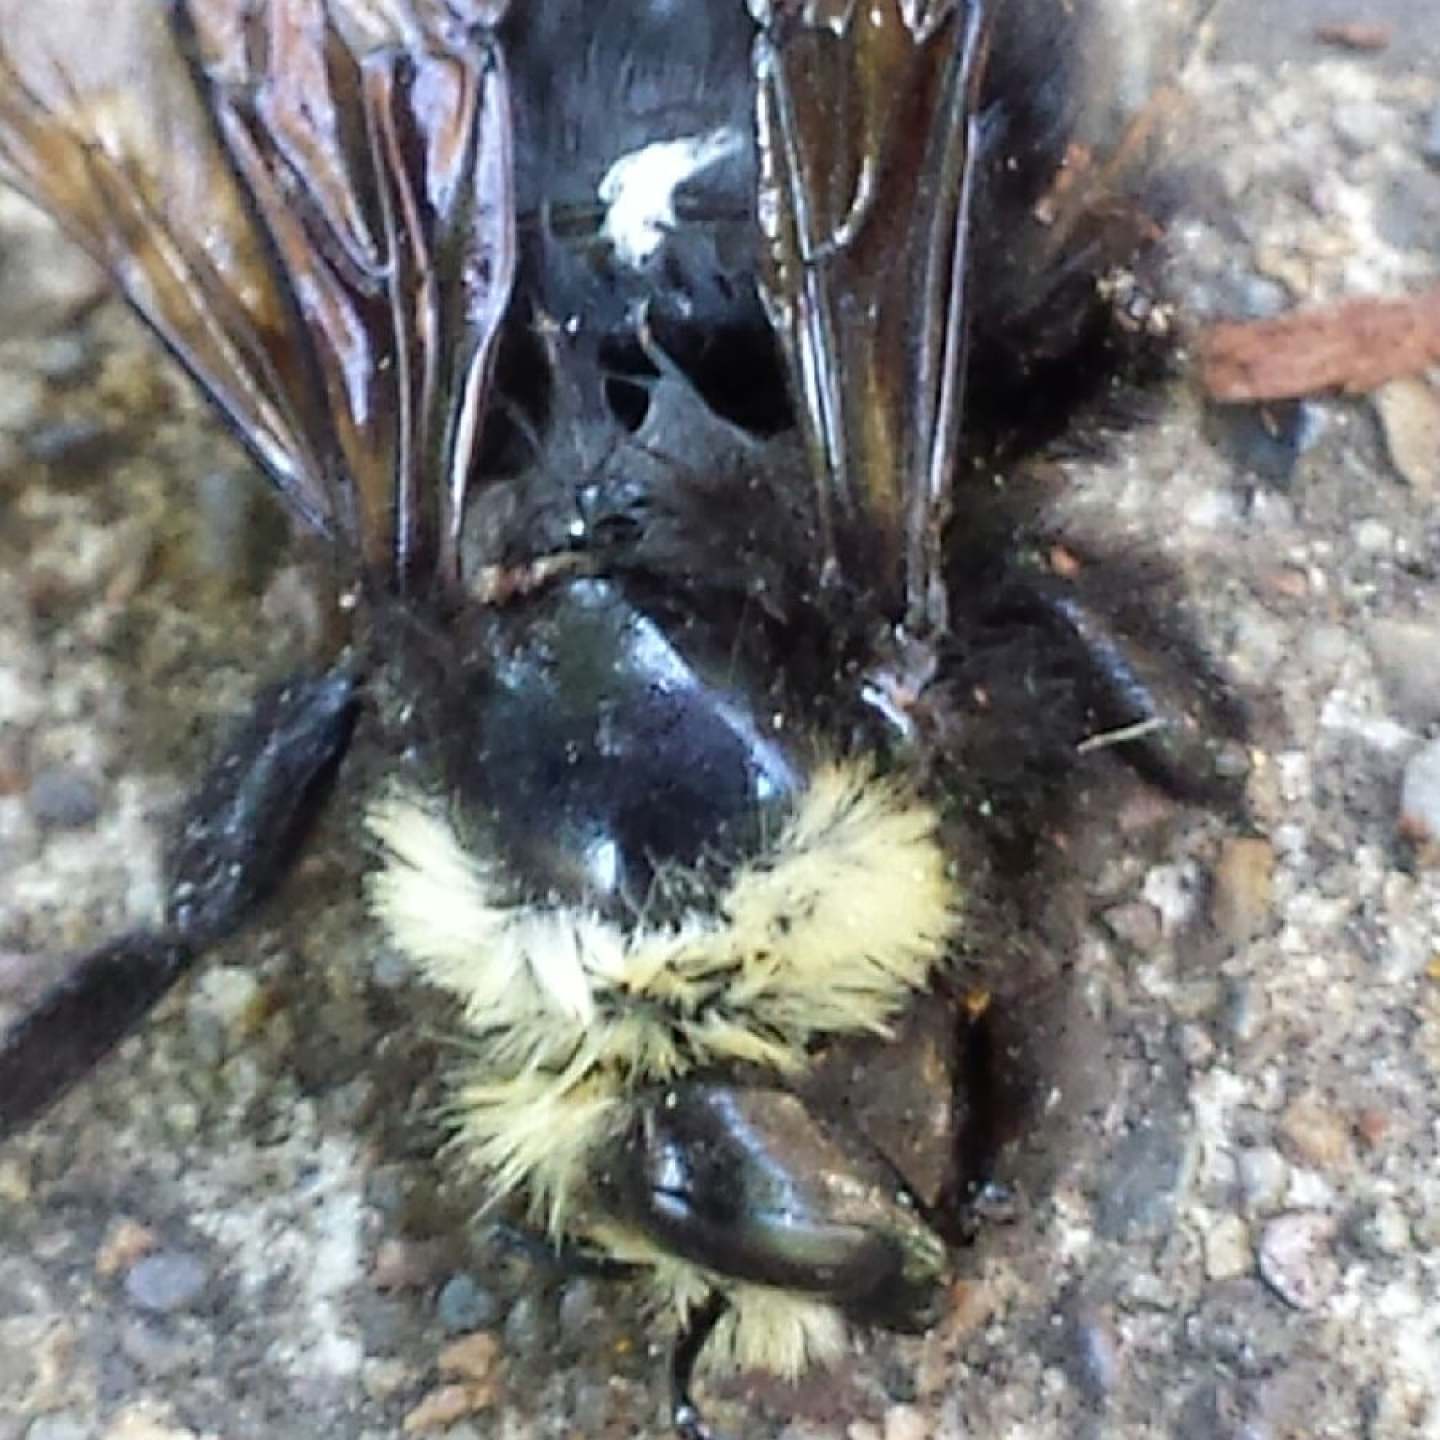 West Eugene bumble bee dead after neonic spray